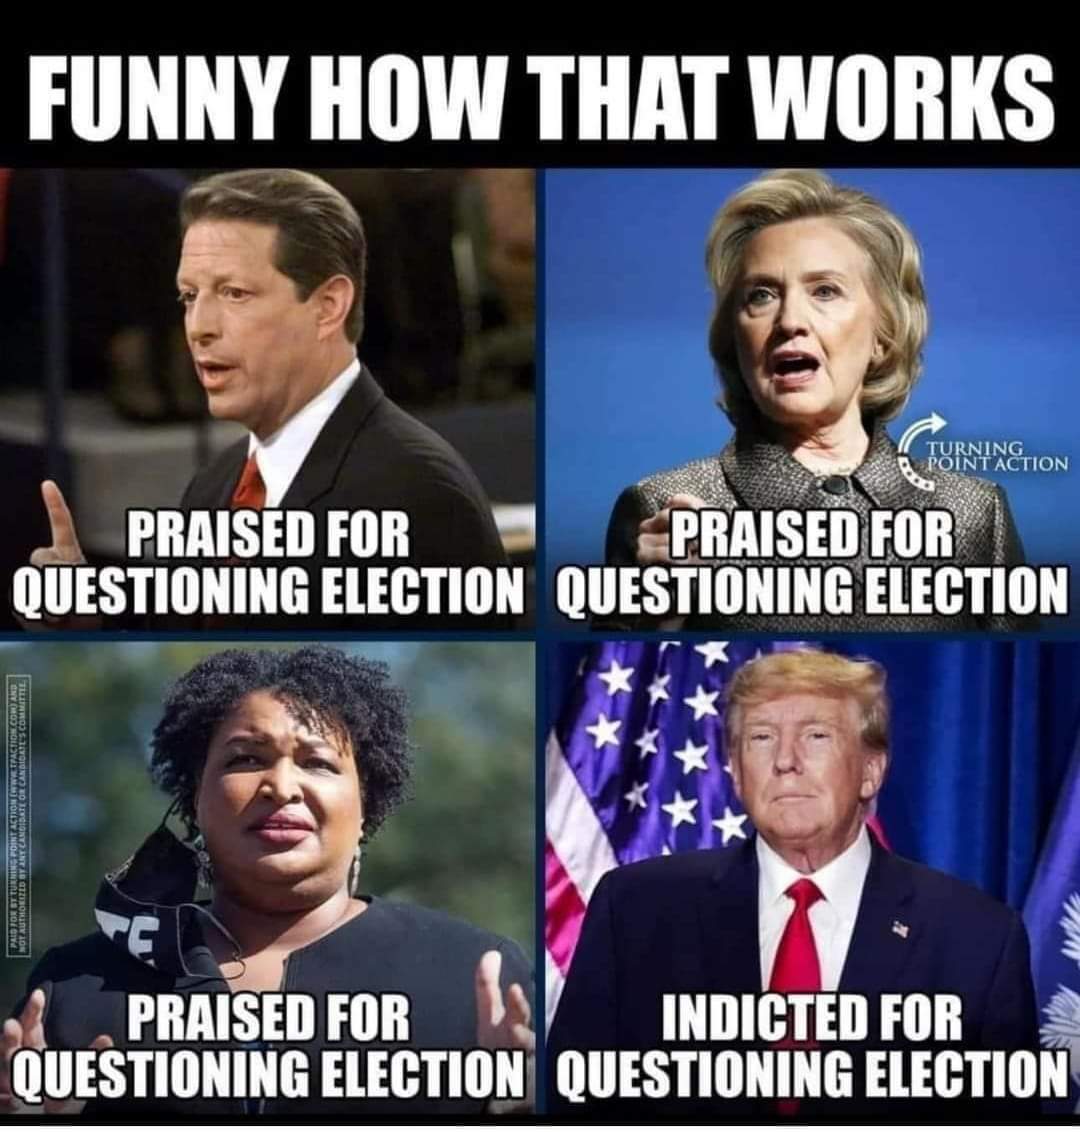 All questioned election results. Only President Trump is indicted for it. Funny how that works.